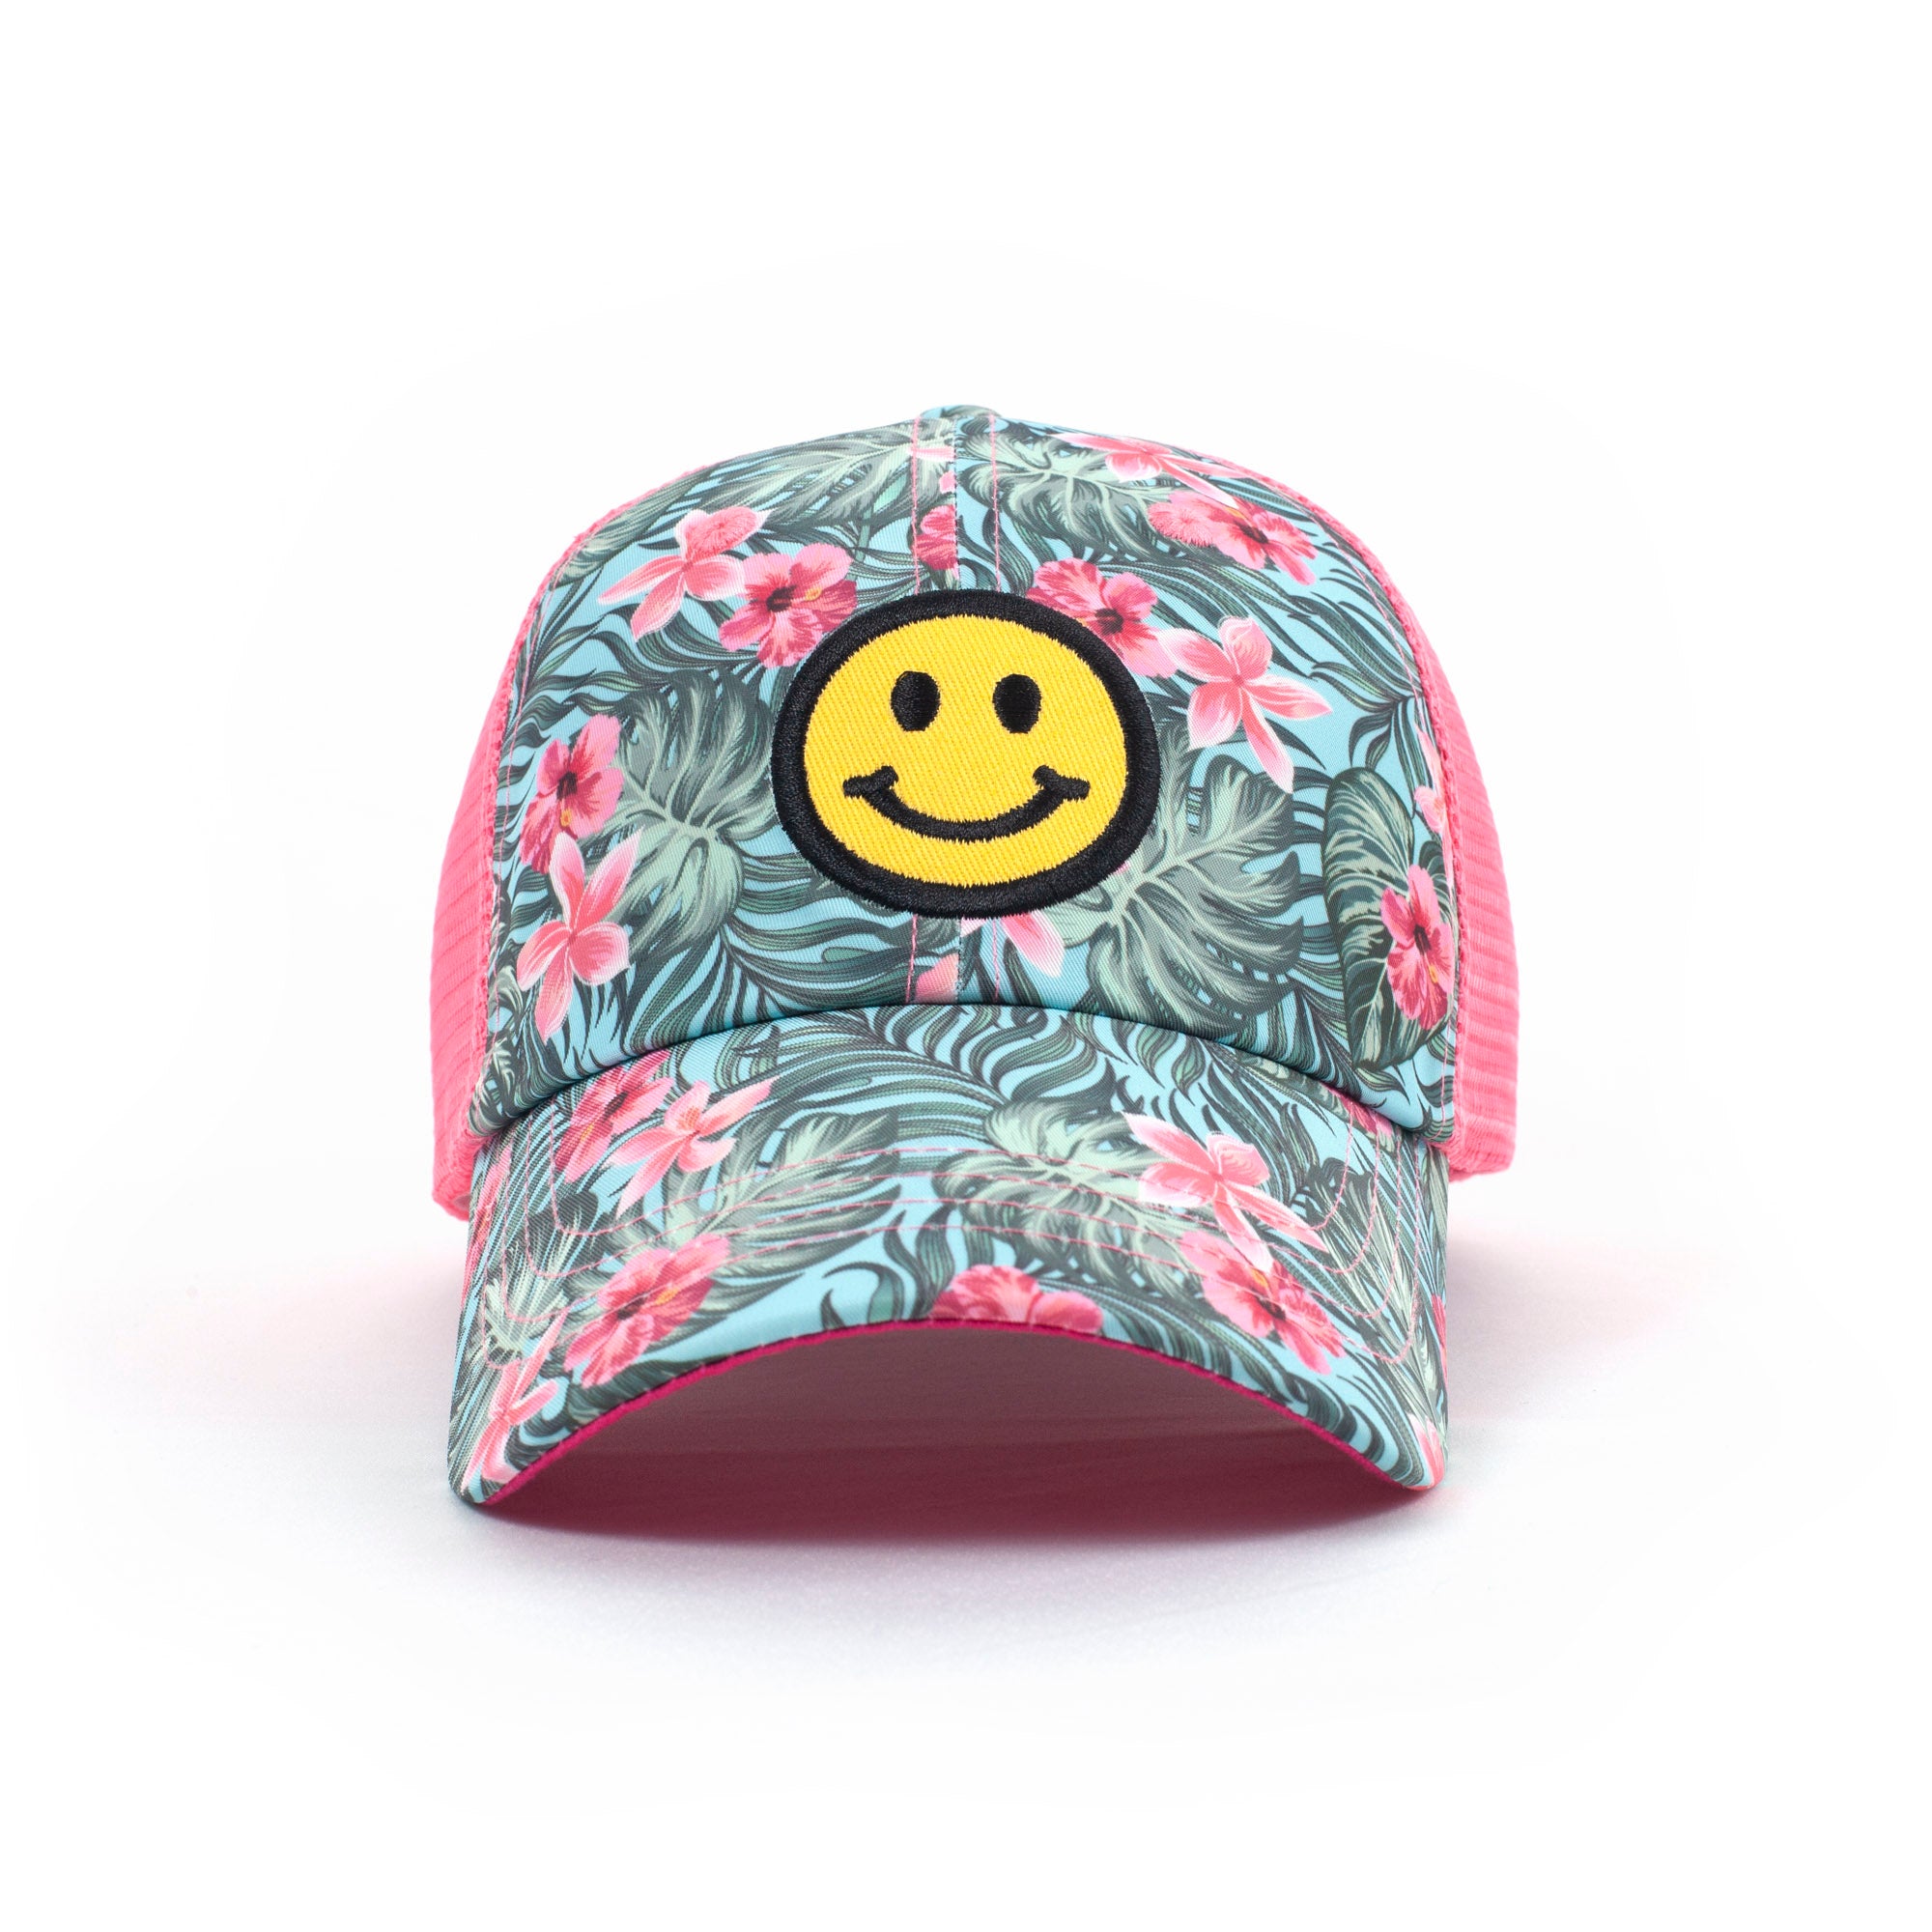 Women’s Hats, Women’s Trucker Hats, Trucker Hats, Hats, Adjustable Hats, Everyday Use, Comfortable, Happy Face, Hawaiian, Pink Flowers, Pattern